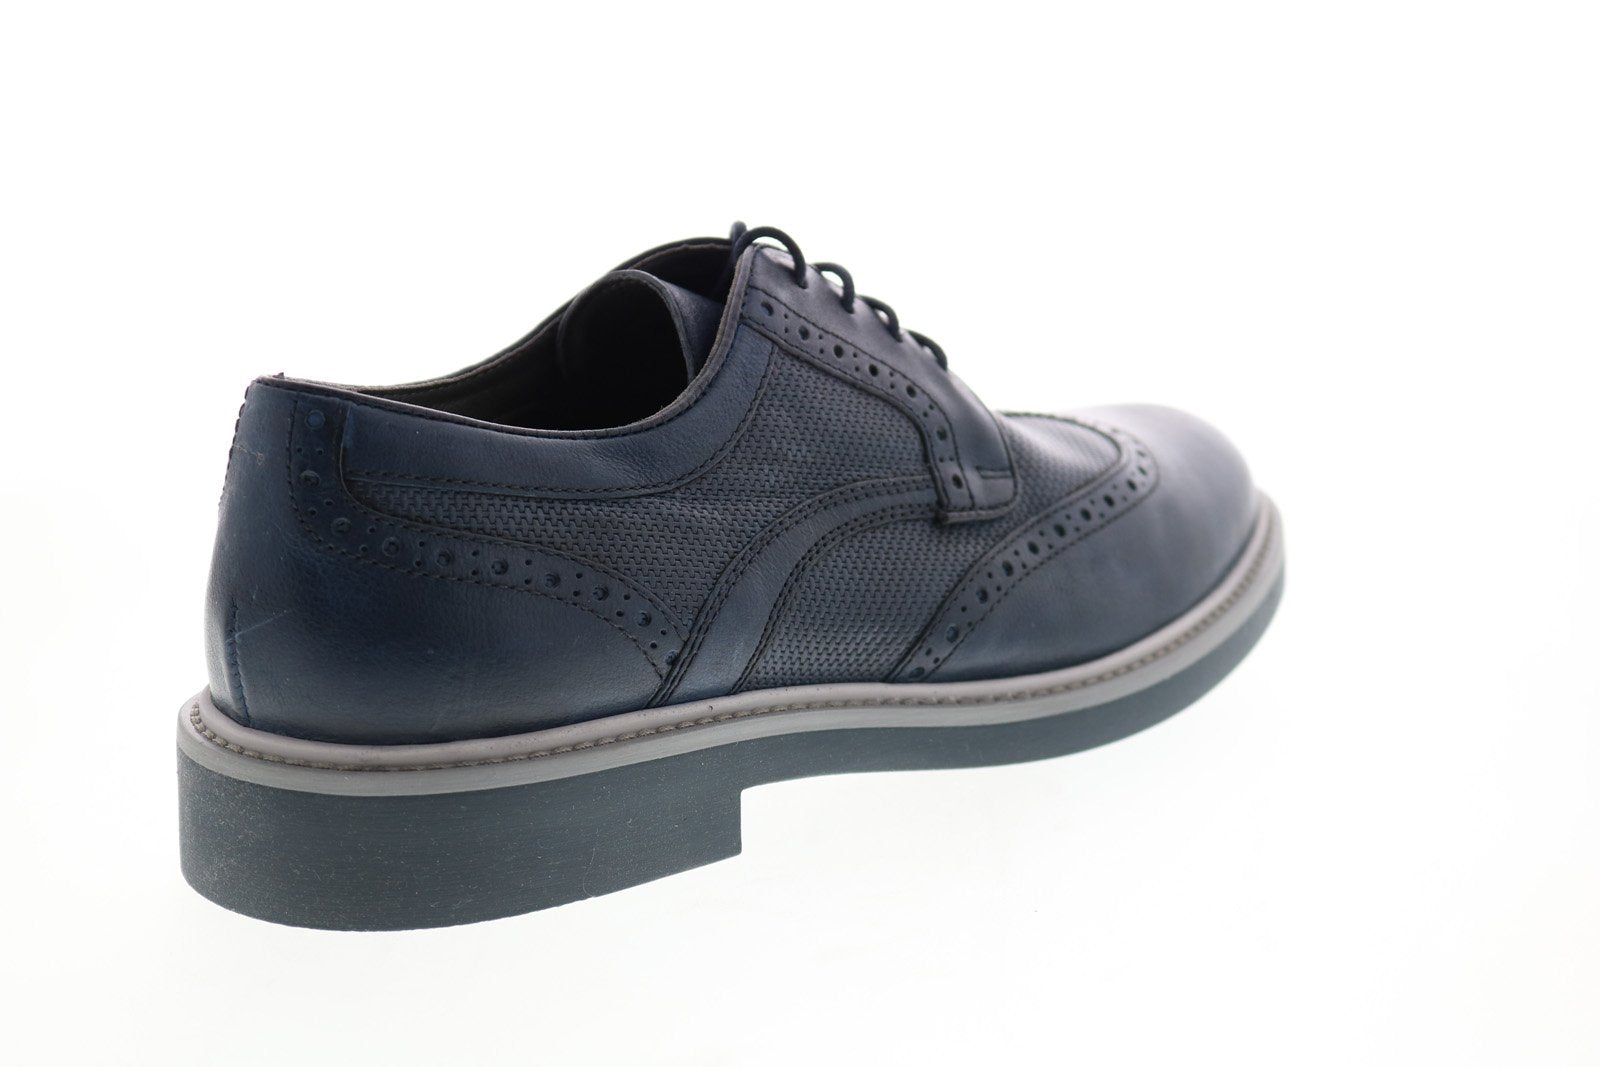 banco mil millones perderse Geox U Silmor Mens Blue Leather Oxfords & Lace Ups Wingtip & Brogue Sh -  Ruze Shoes